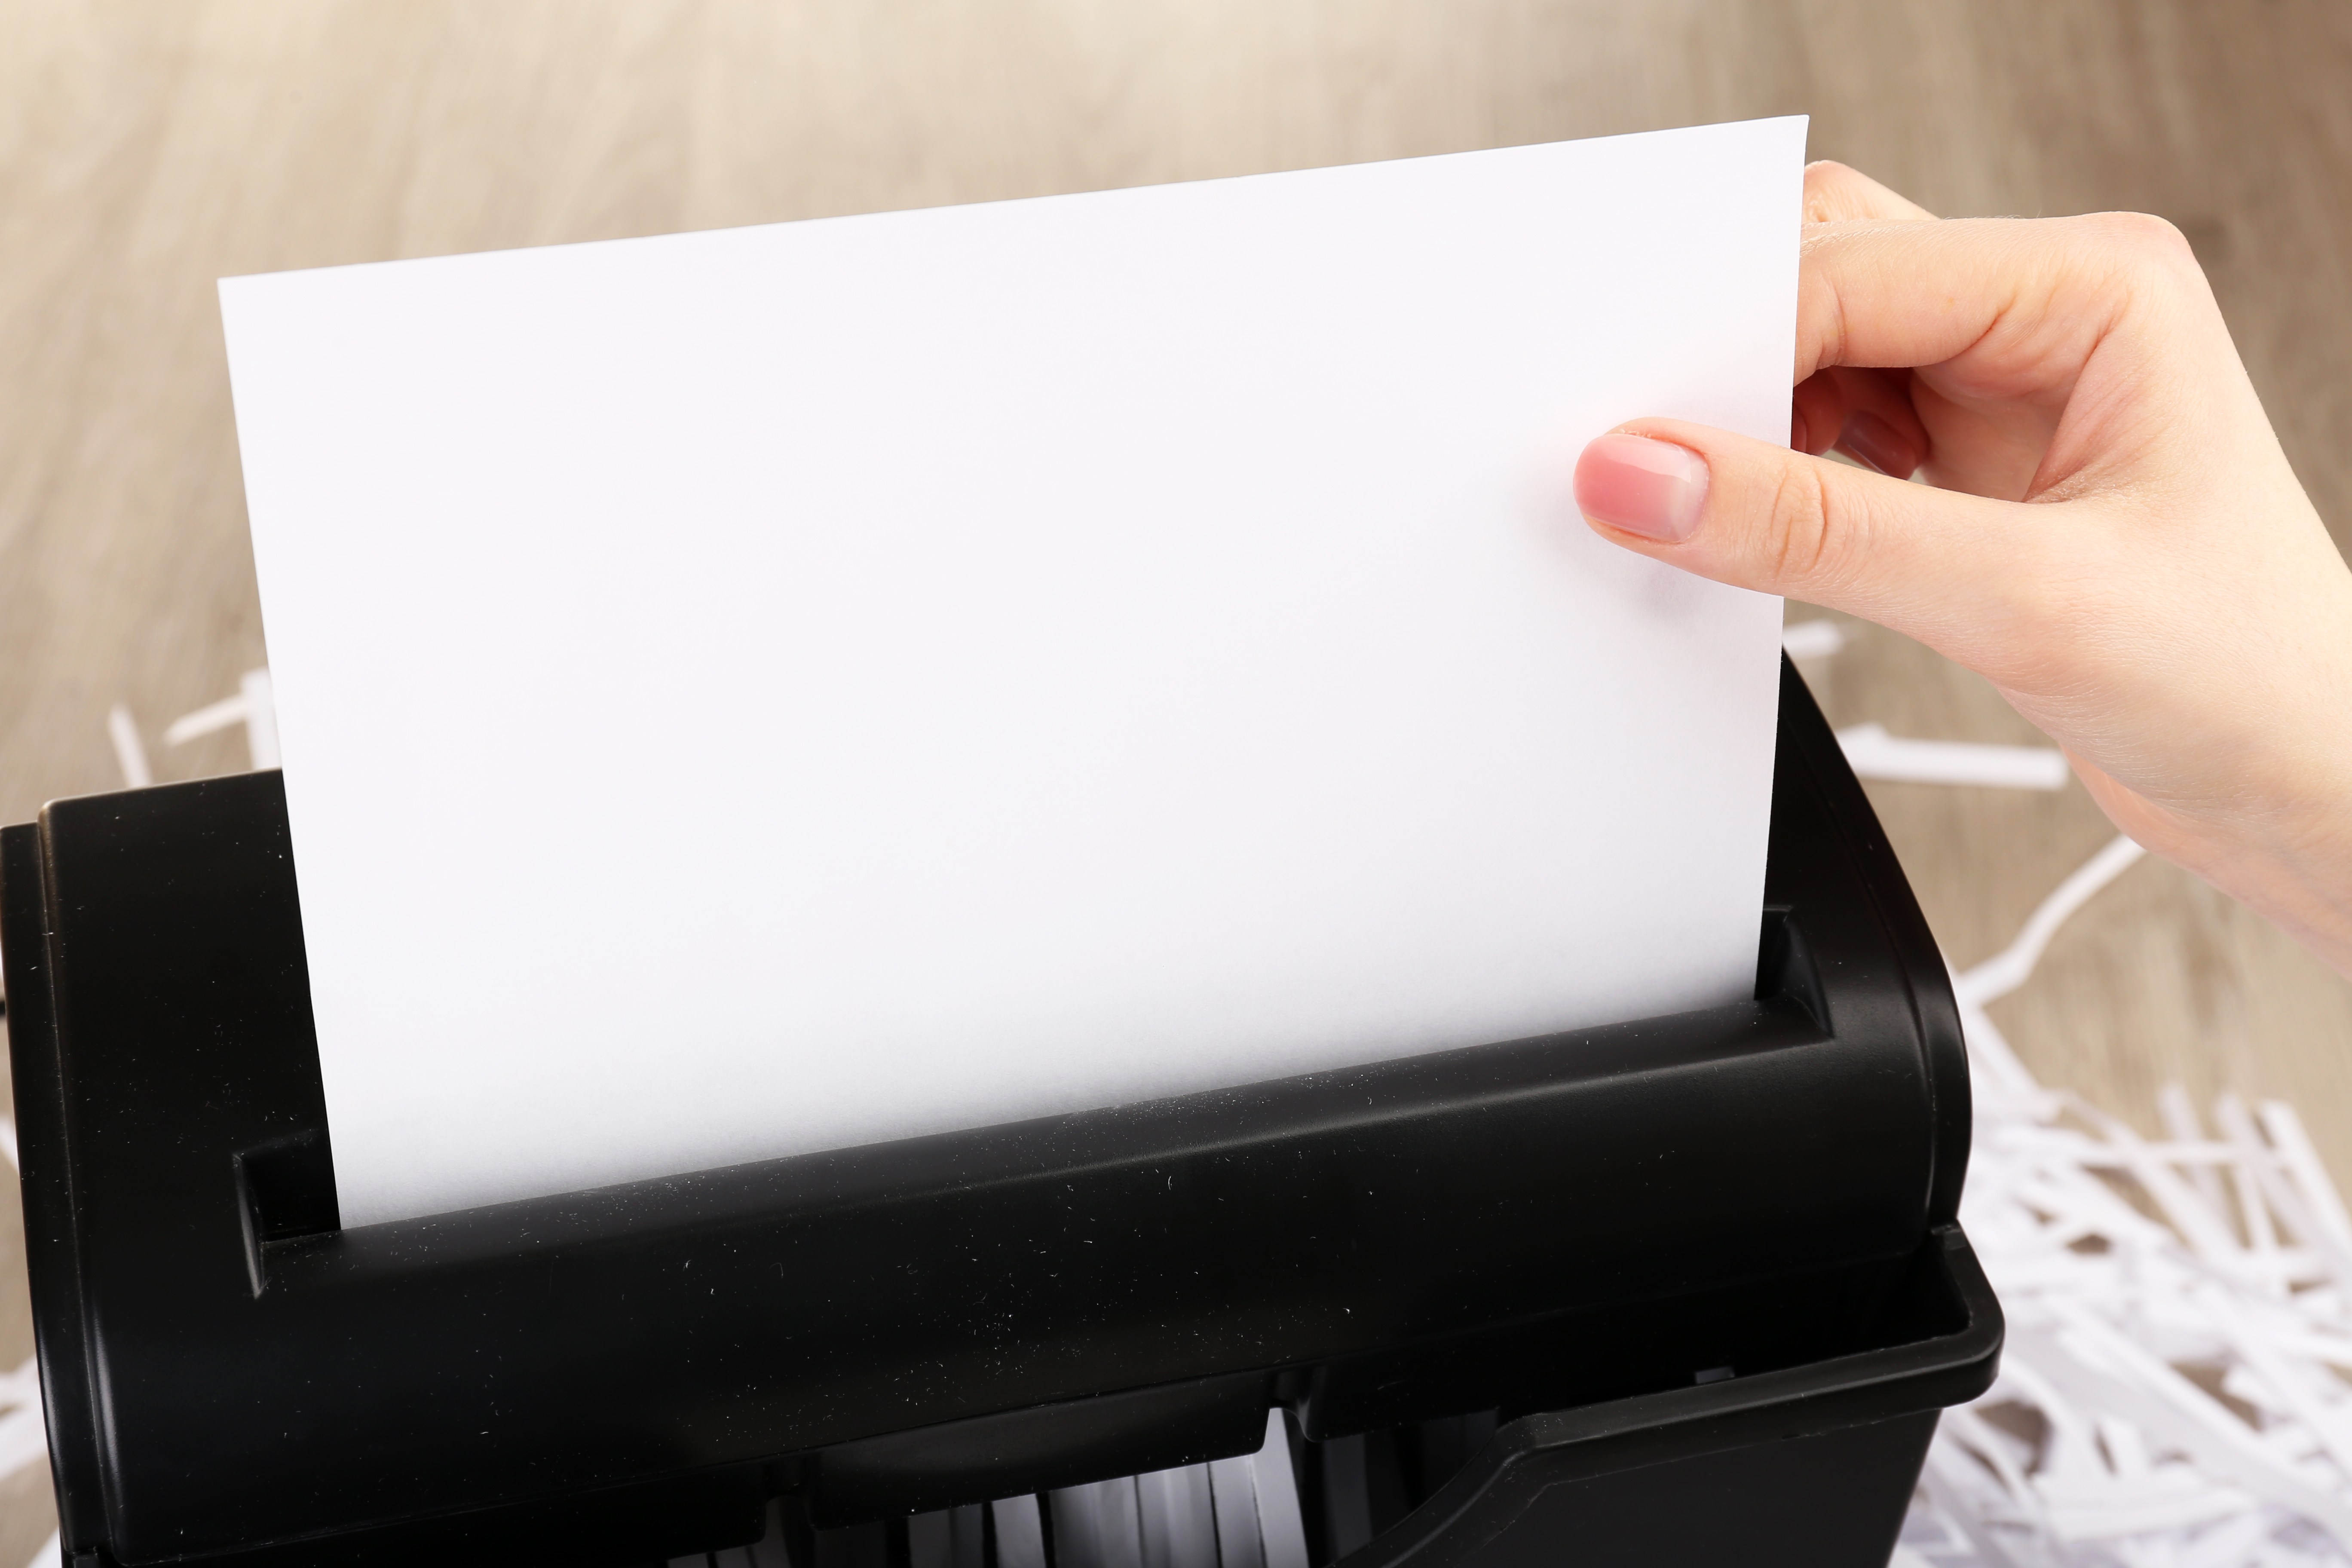 Shred sensitive documents when you're purging papers. You don't want your personal info to fall into the wrong hands! || How to declutter papers | overwhelmed by paper clutter | shredding paper